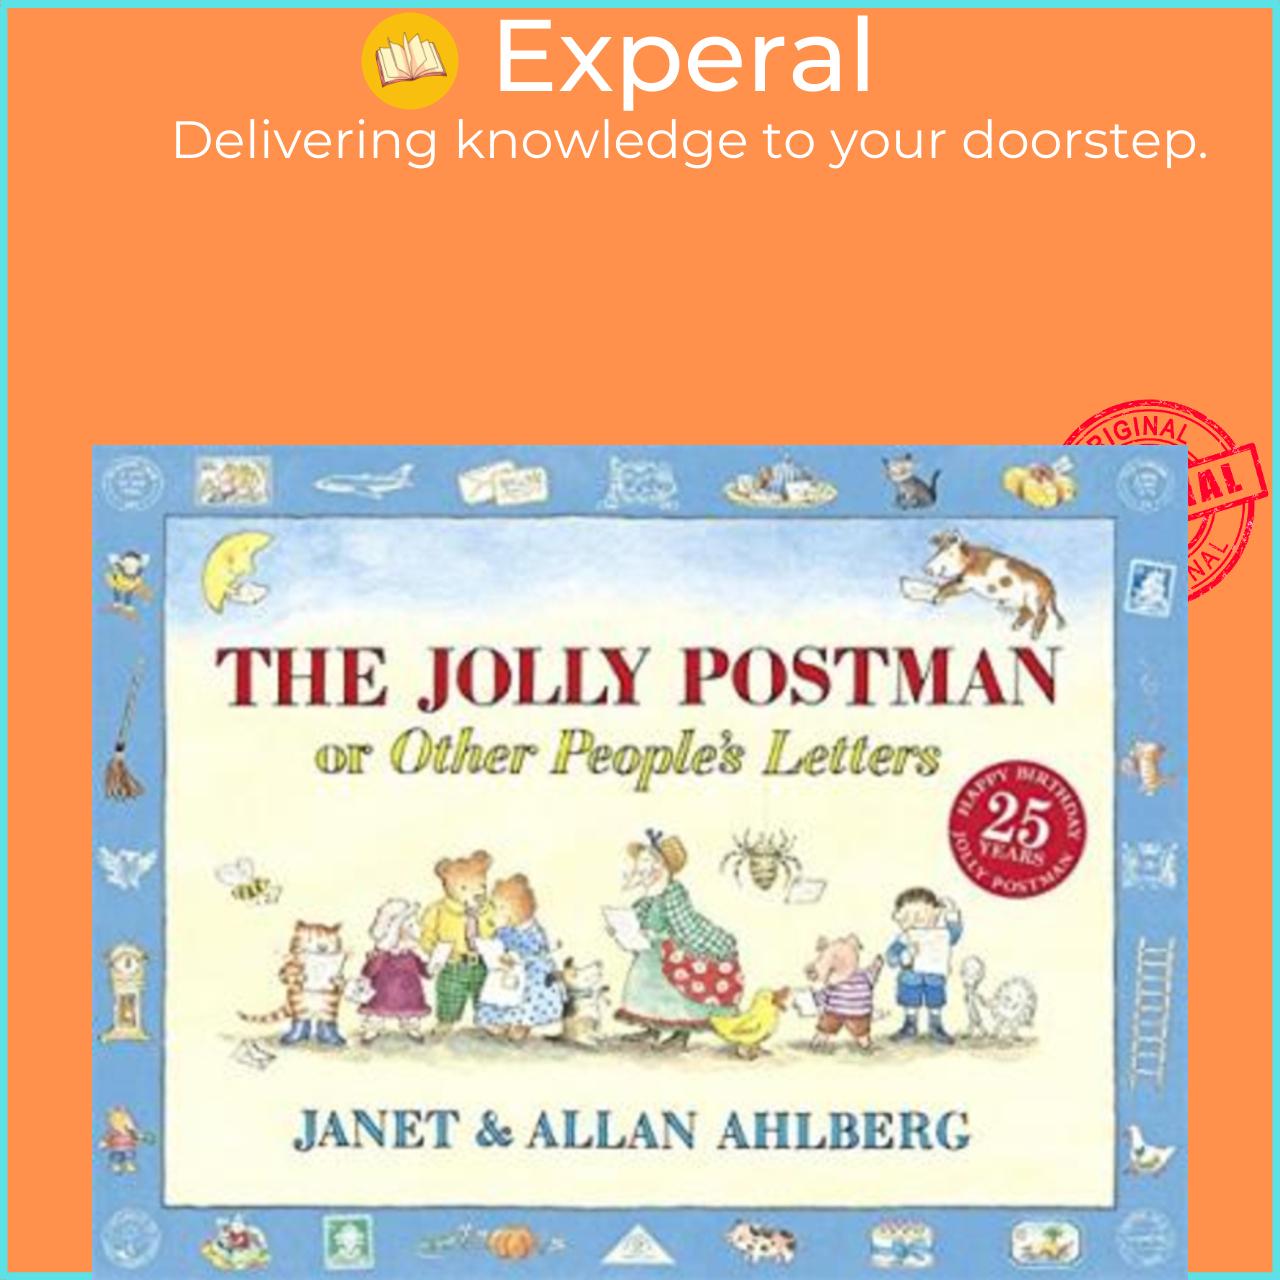 Sách - The Jolly Postman or Other People's Letters by Allan Ahlberg (UK edition, hardcover)